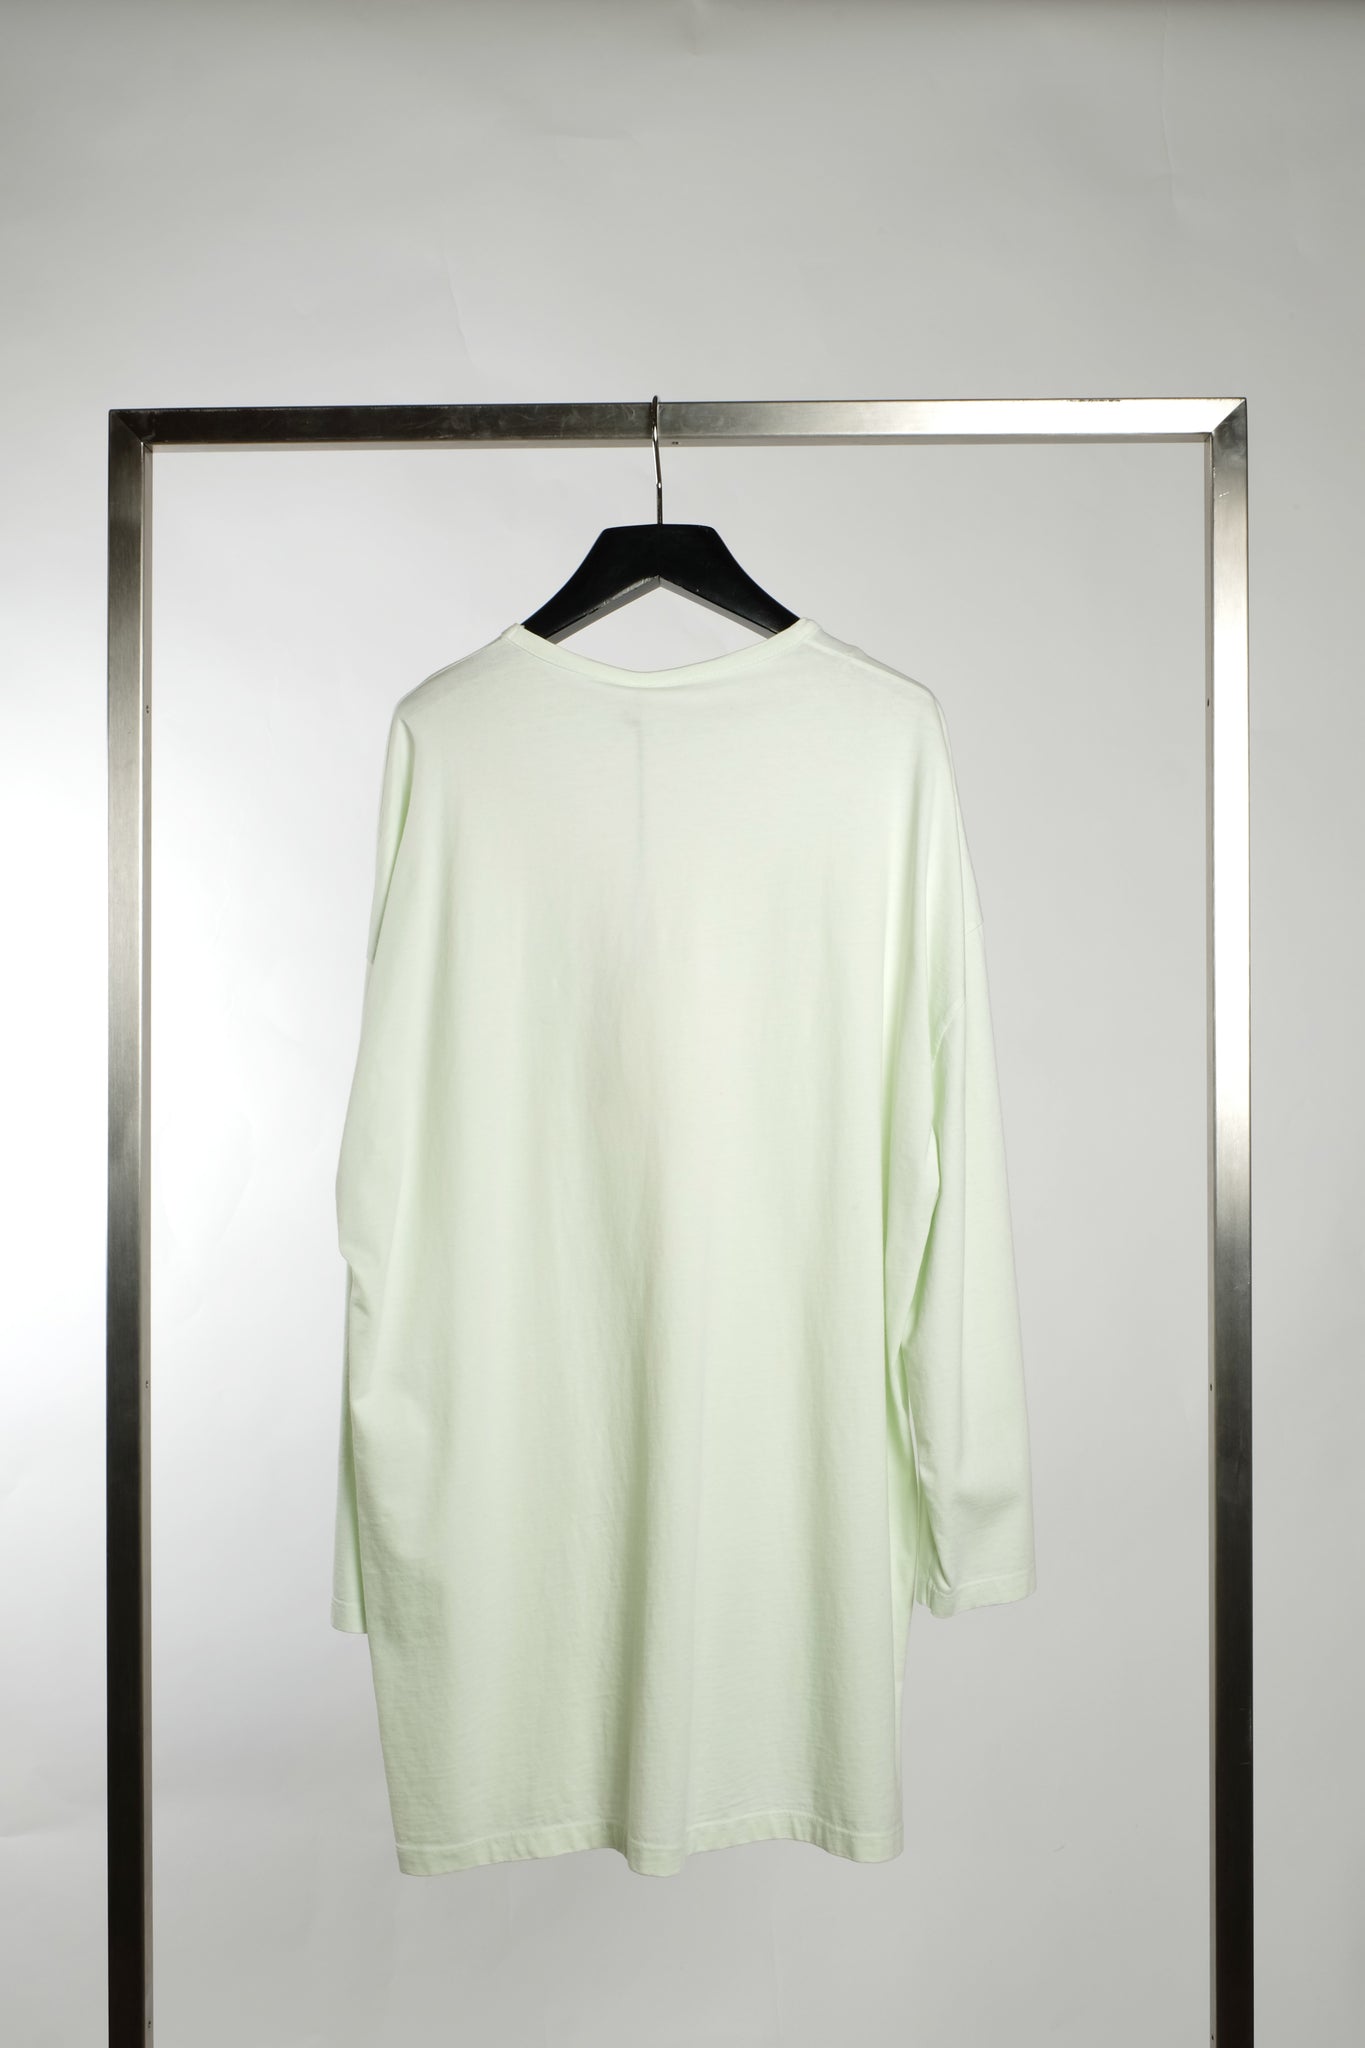 POCKET SHIRT BY CAN PEP REY IN MATCHA LATTE GREEN